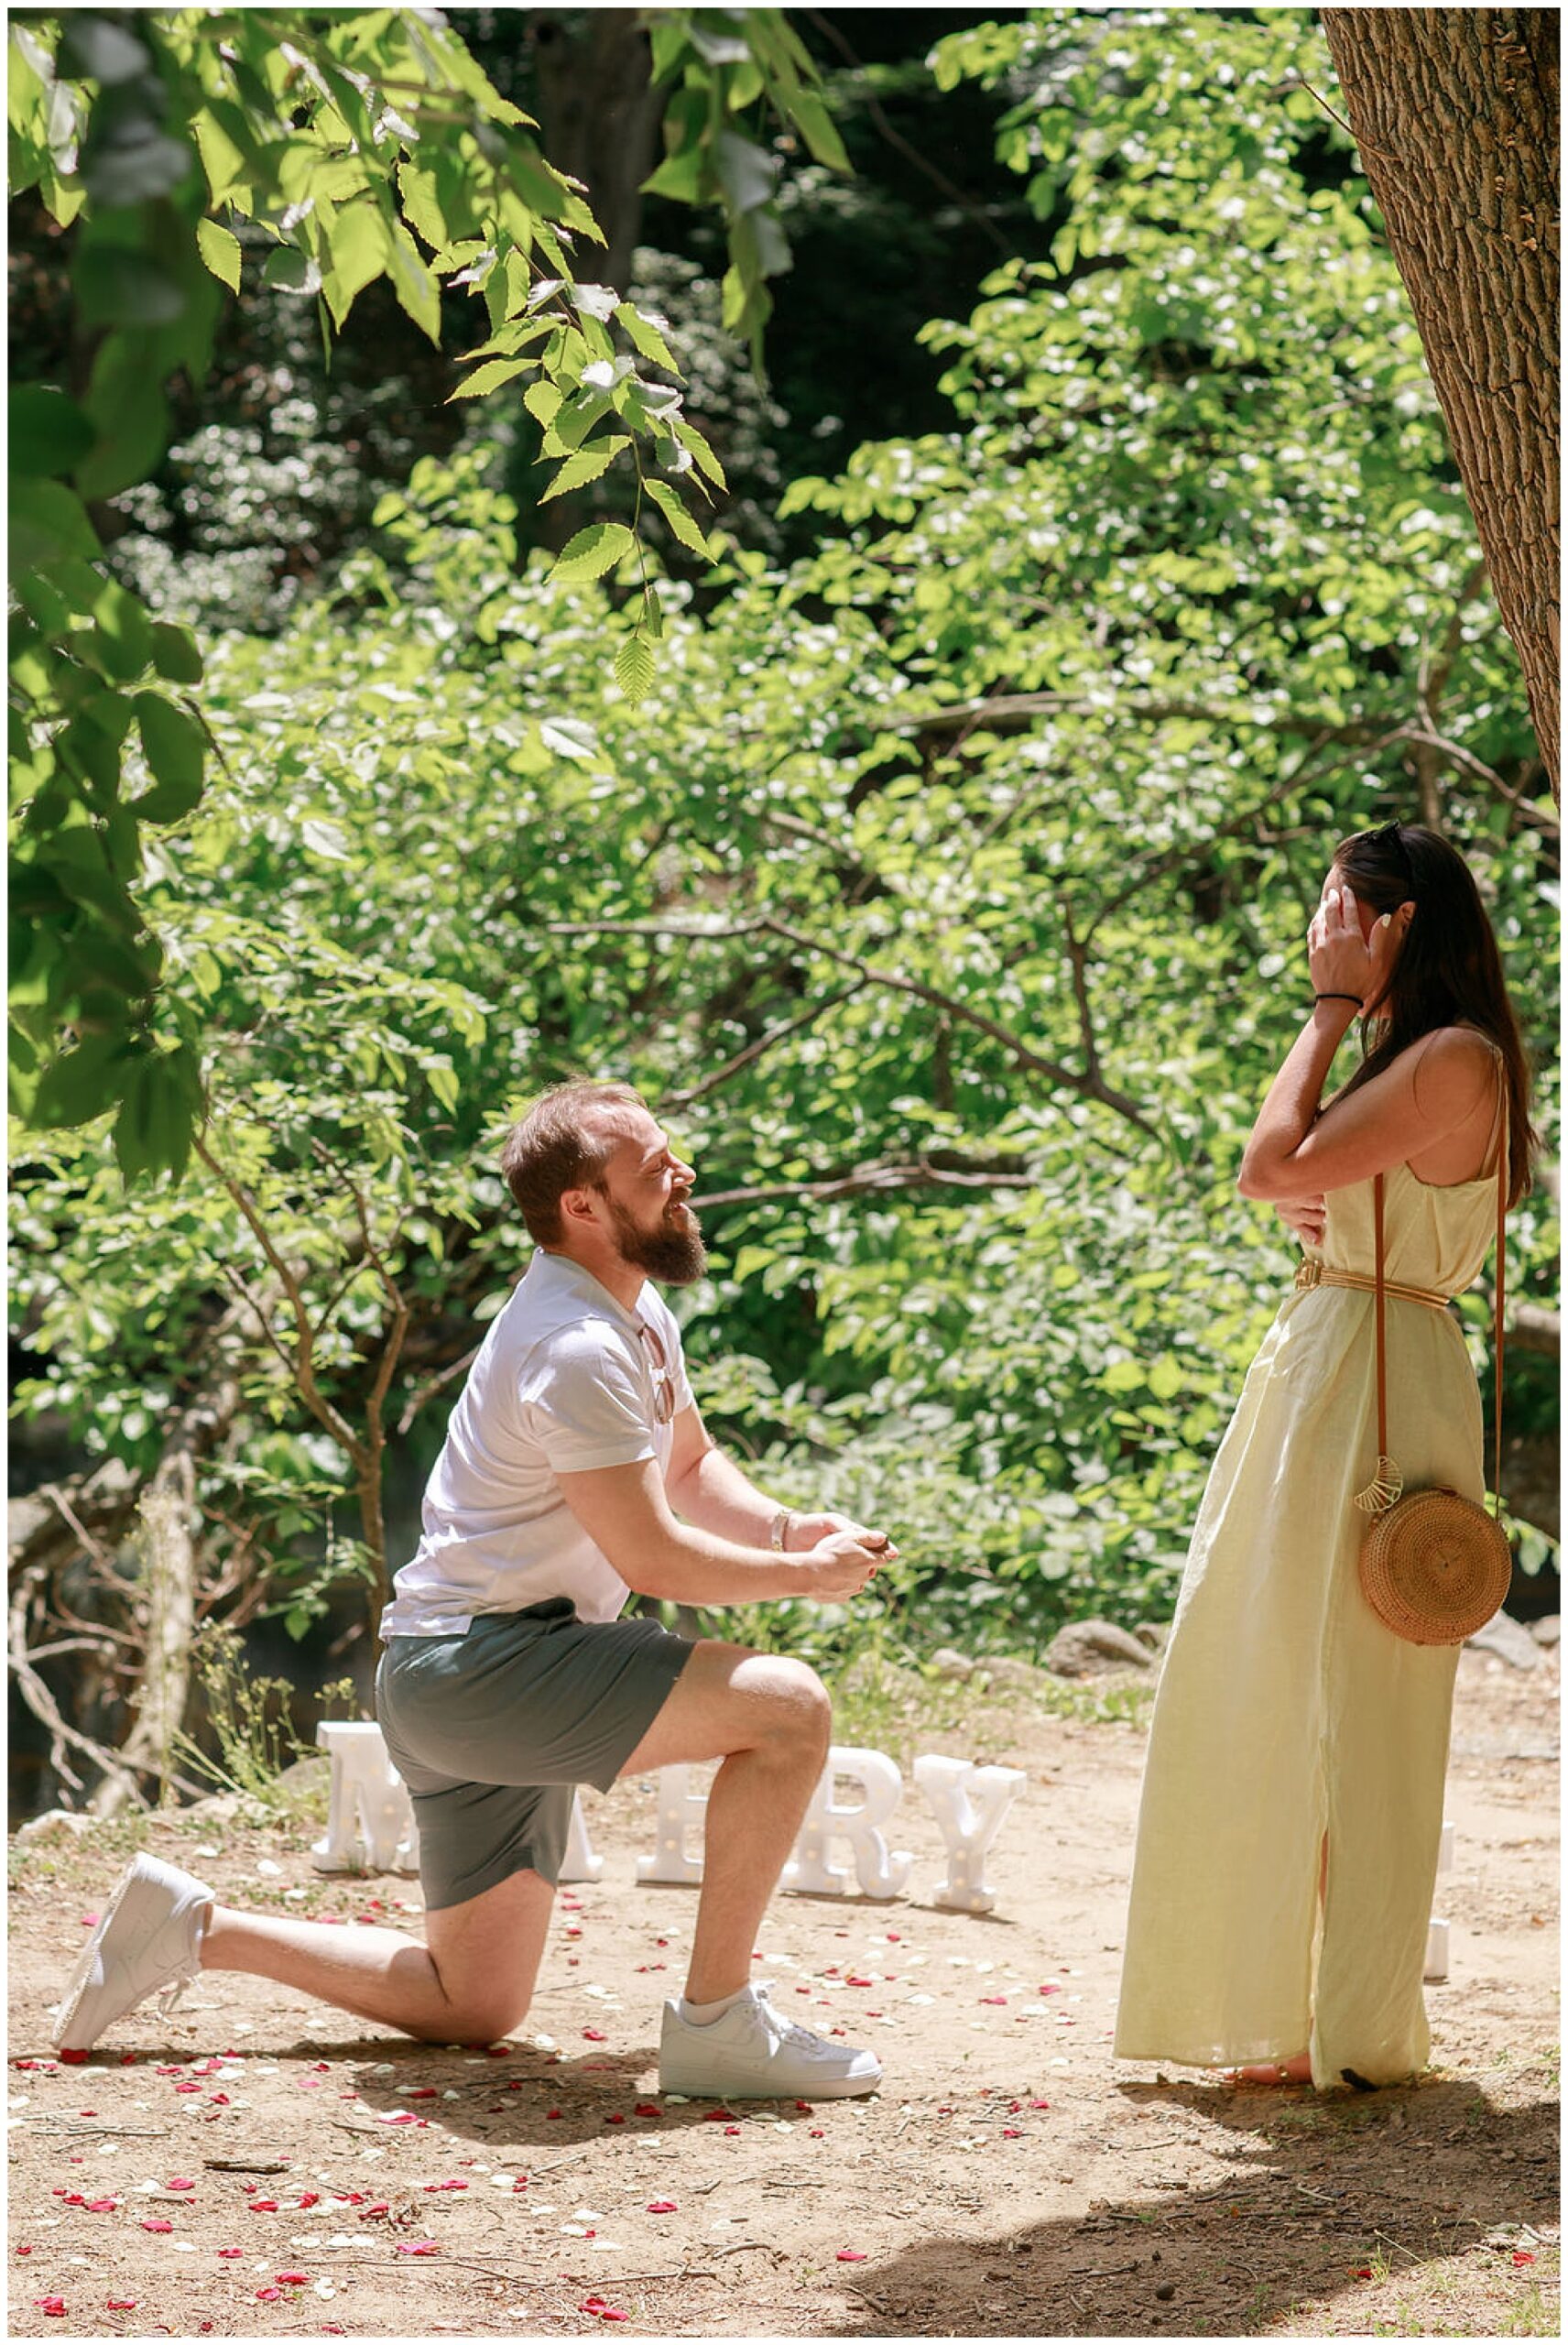 A man gets down on one knee to propose to his girlfriend in a park while she wears a yellow dress dc engagement photographer